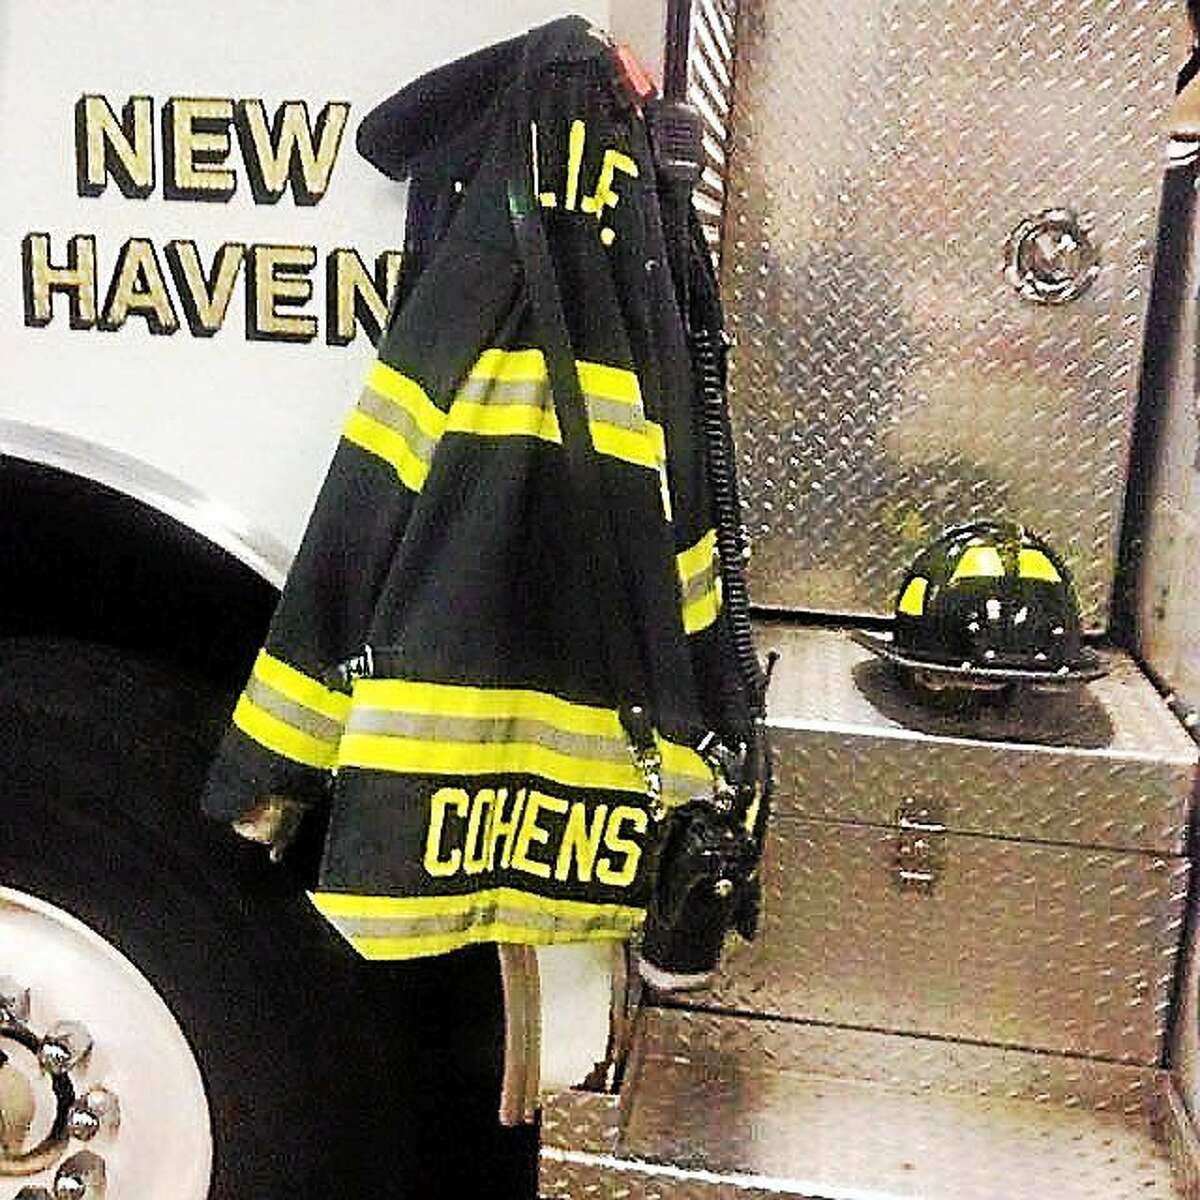 The EMS duty jacket, radio and helmet belonging to paramedic Linda Cohens hangs from a New Haven Fire Department truck Monday, a day after Cohens was found dead outside her home in Hamden. Police are still investigating her death.